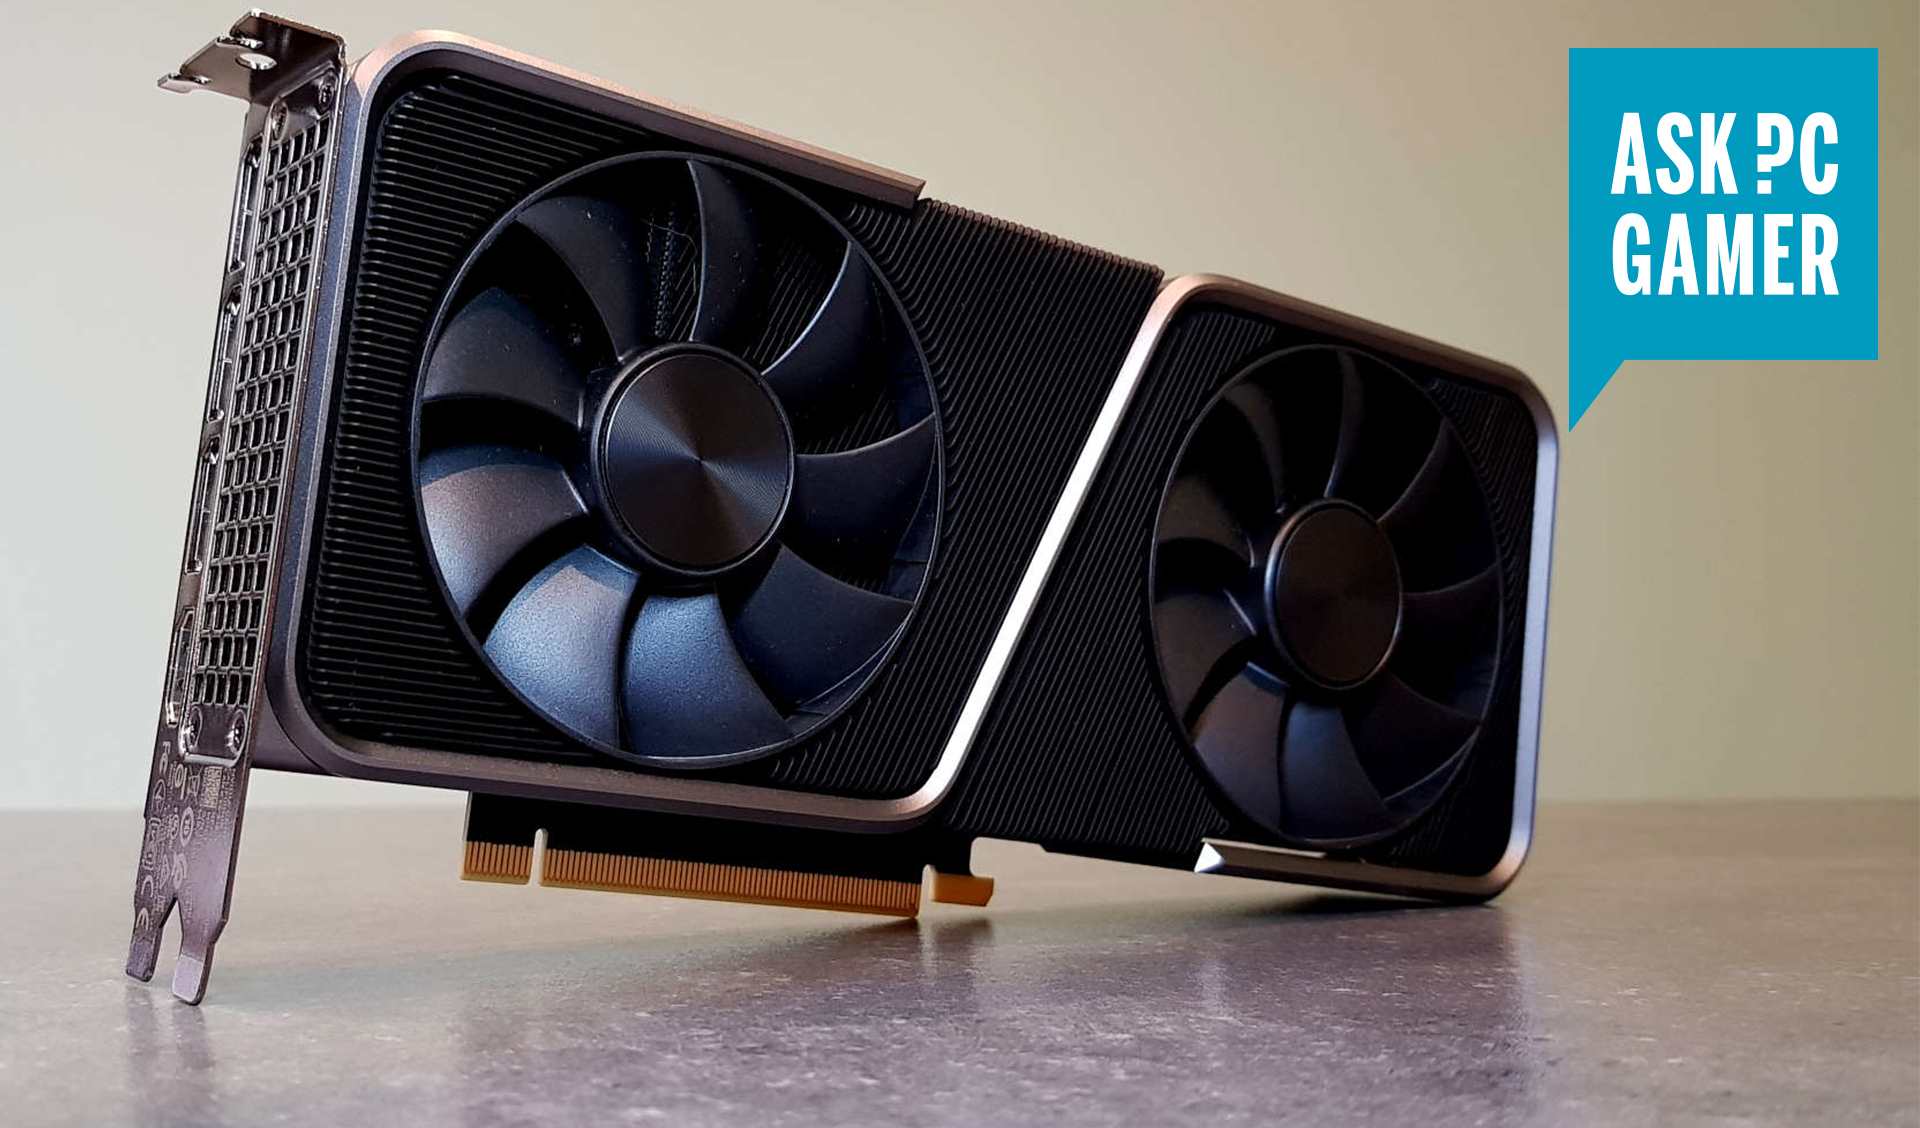 Catena Male hæk How to overclock your graphics card | PC Gamer